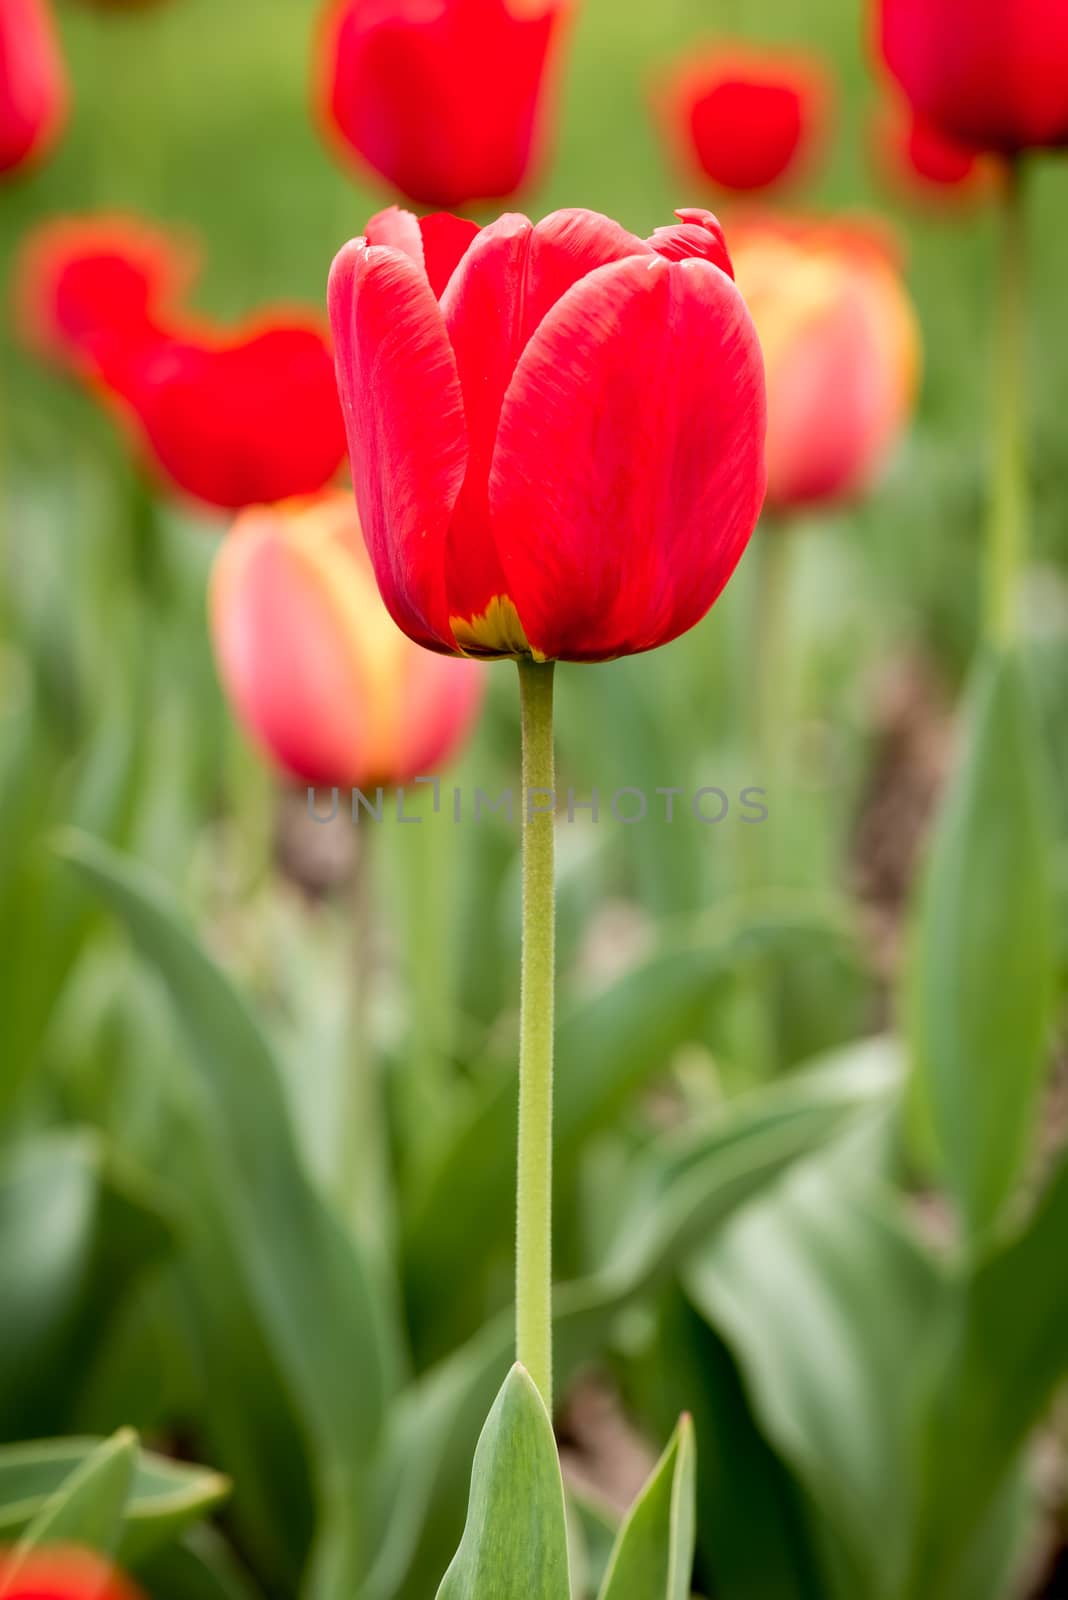 A delicate red Tulip under the warm spring sun rays